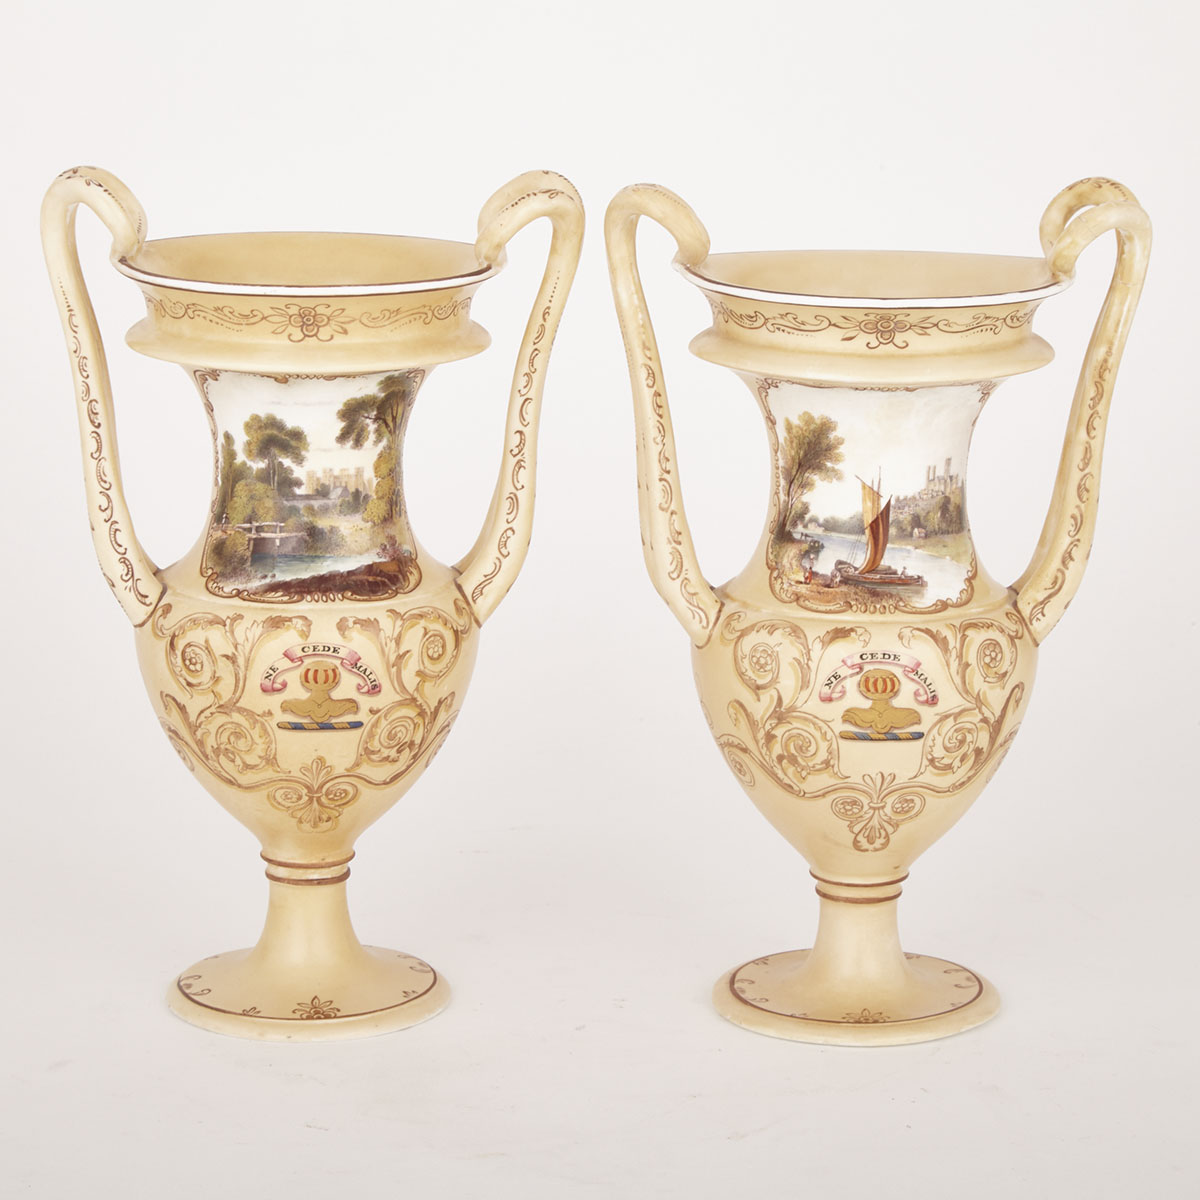 Pair of Spode Armorial Two-Handled Vases, c.1830